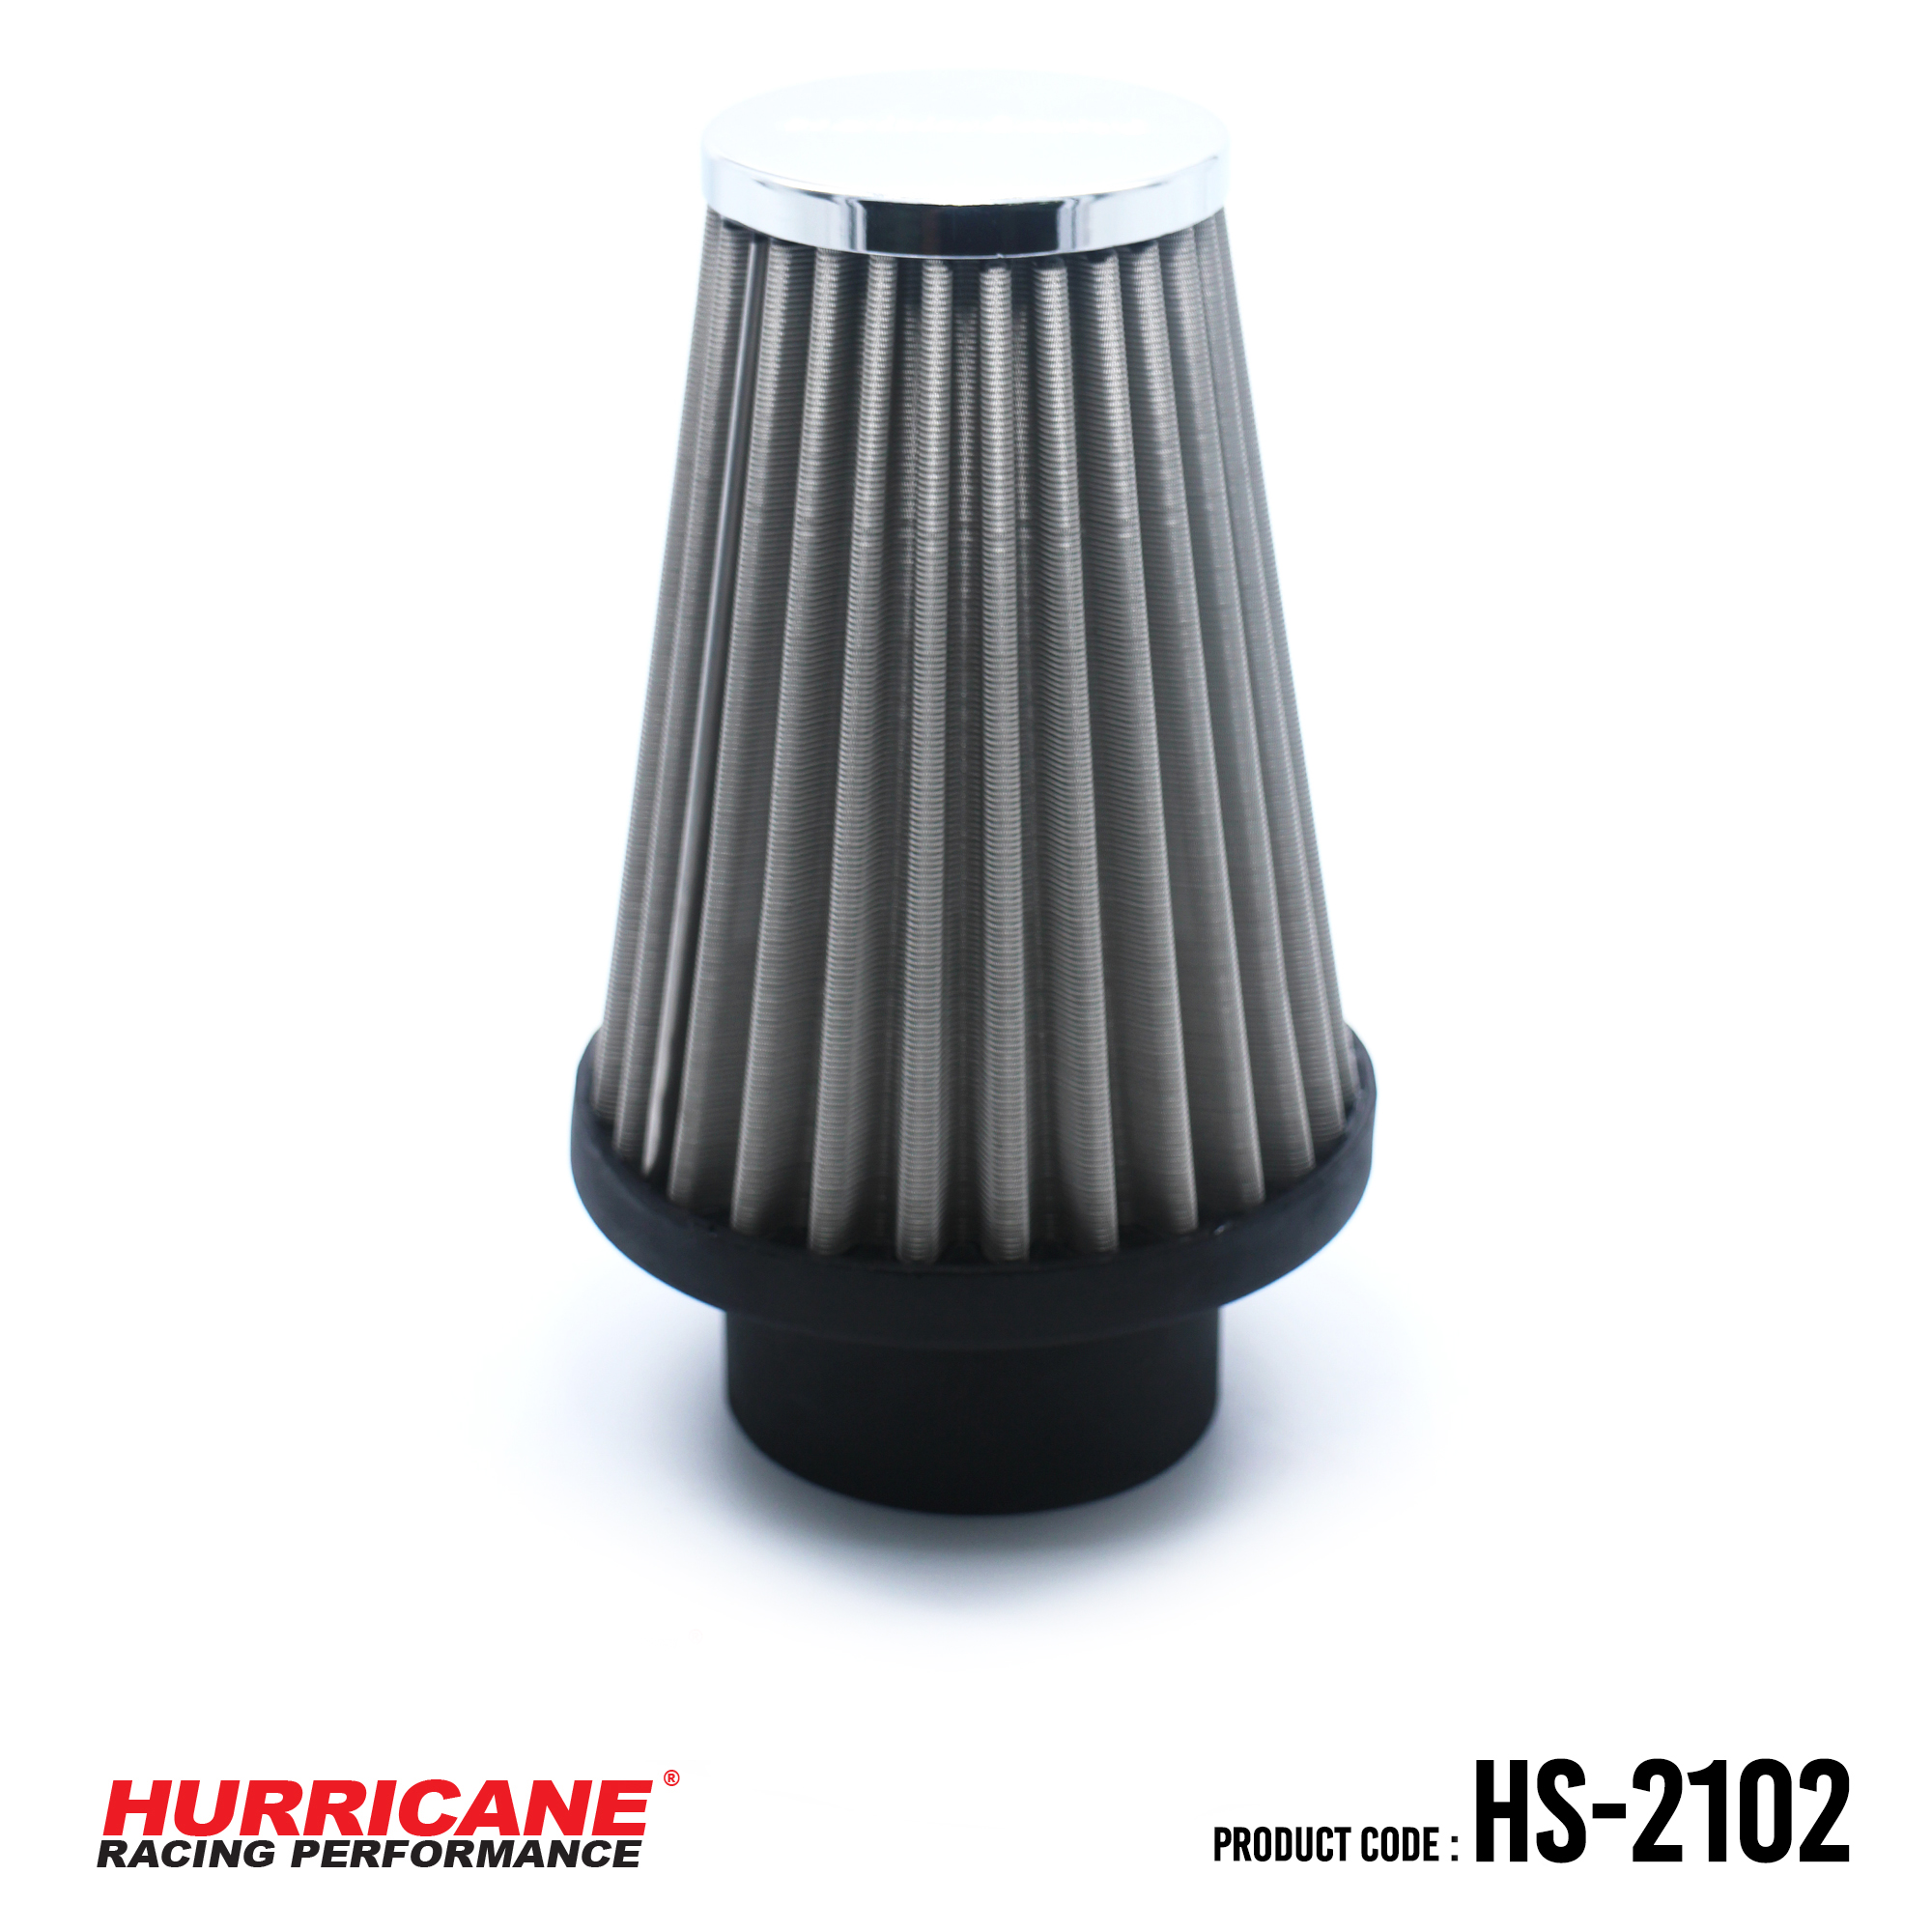 HURRICANE STAINLESS STEEL AIR FILTER FOR HS-2102 กรองเปลือย